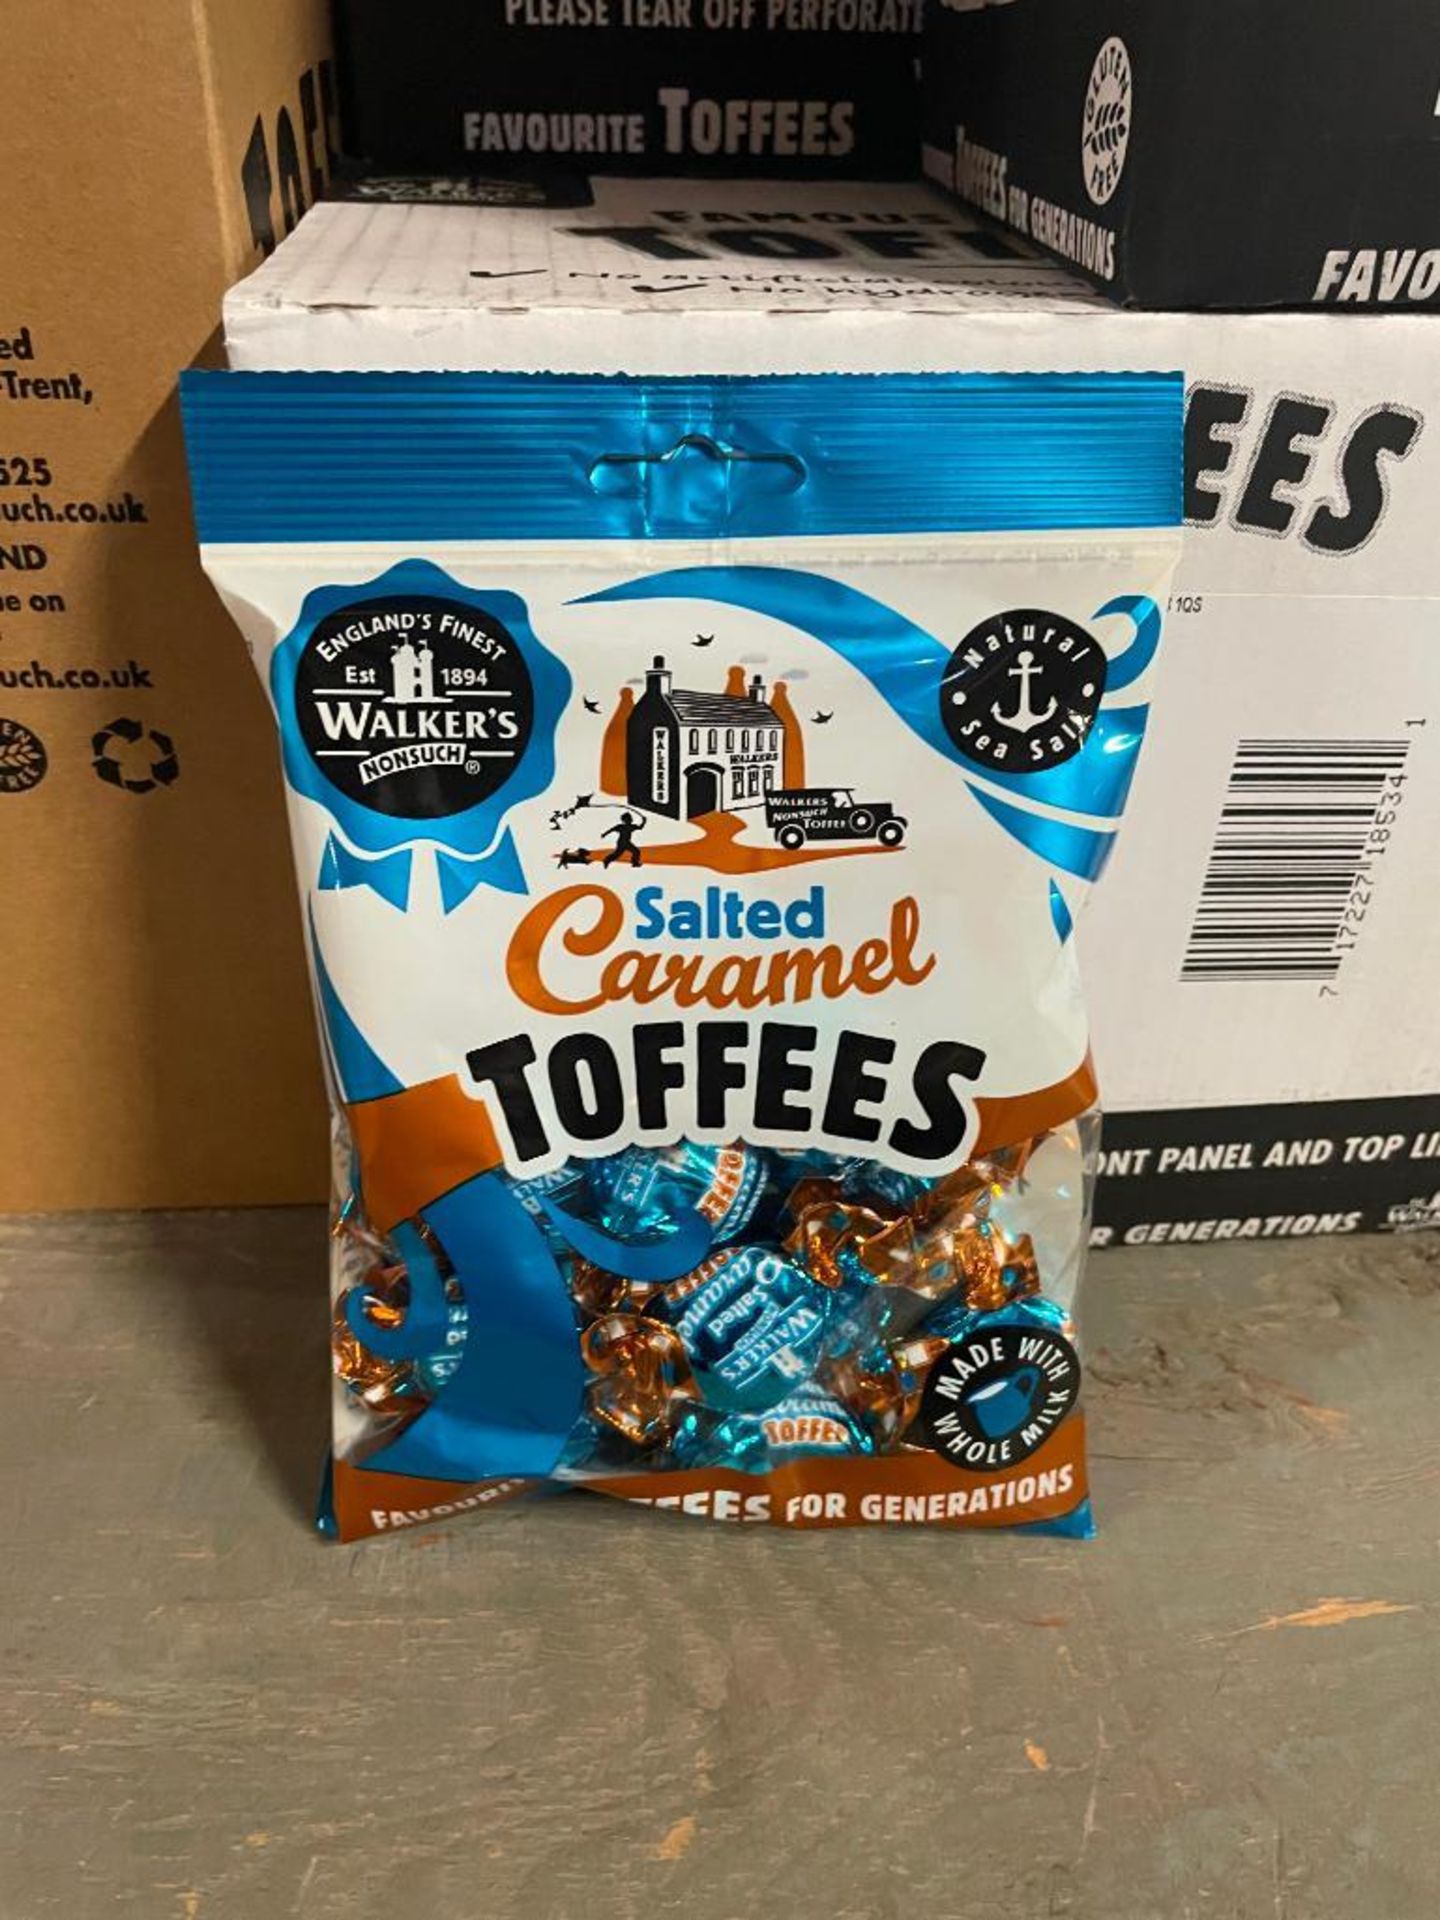 (15) BOXES OF WALKER'S SALTED CARAMEL TOFFEE, 12/150G BAGS PER BOX - Image 2 of 2